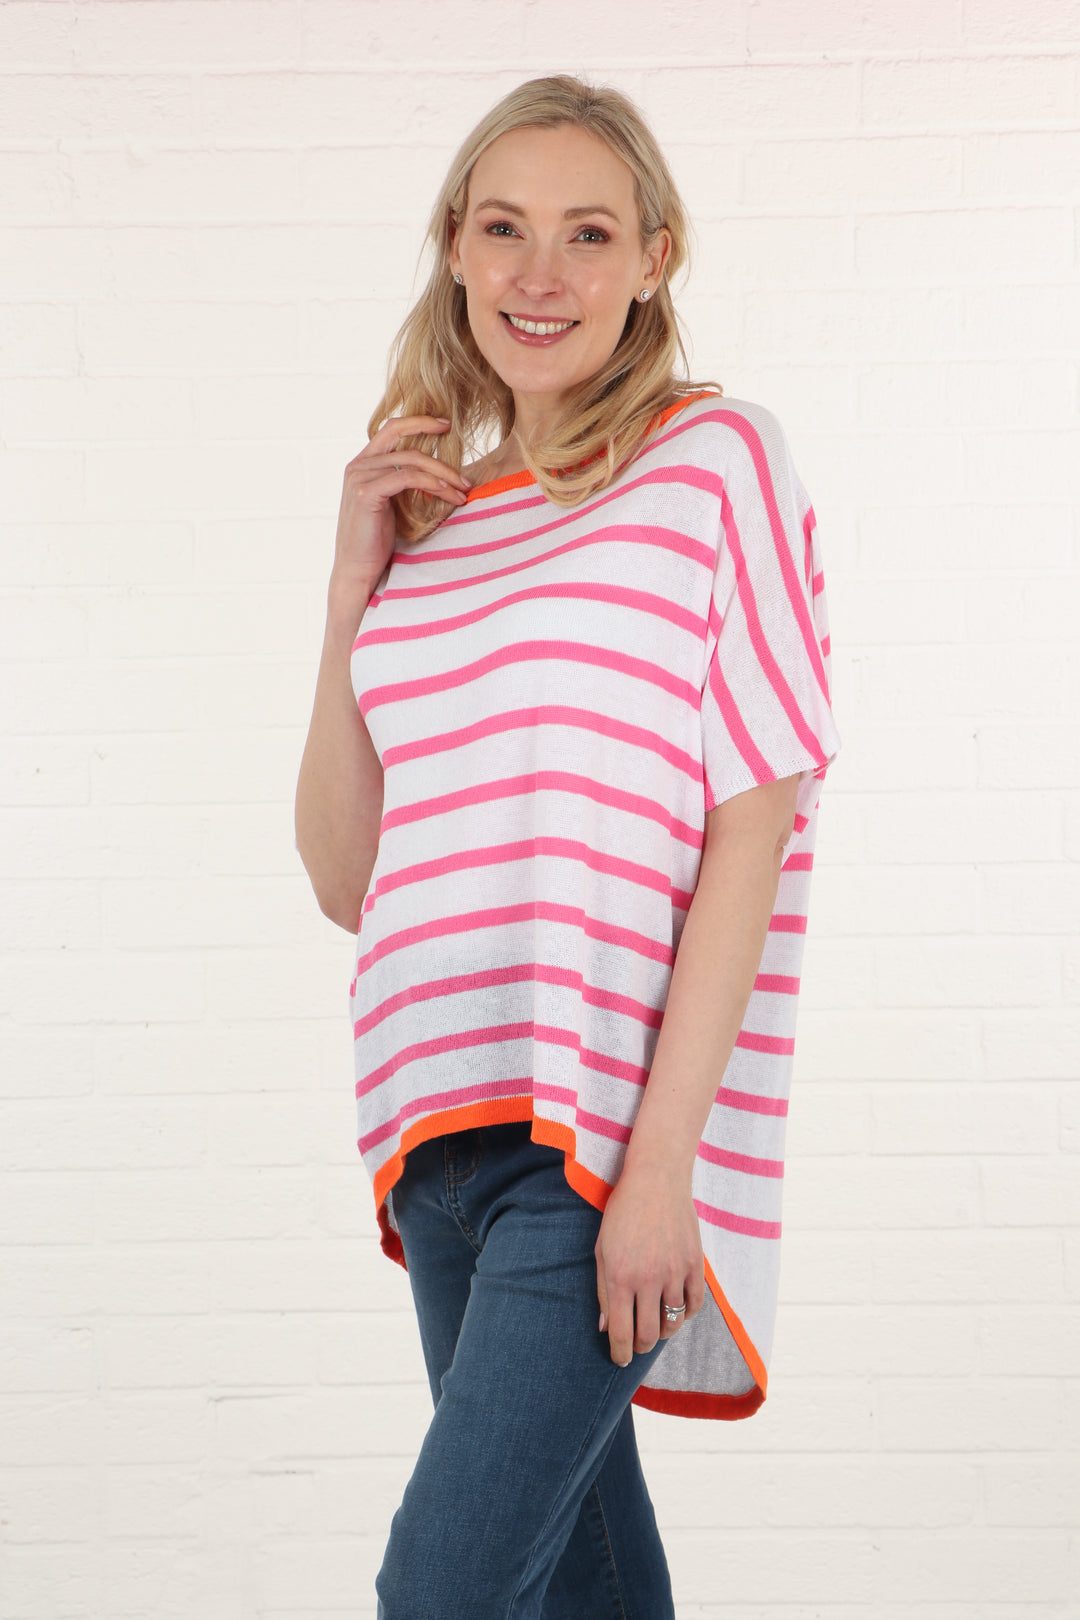 Striped Short Sleeve Cotton Knitted Top with Contrasting Trim in White Orange and Fuchsia